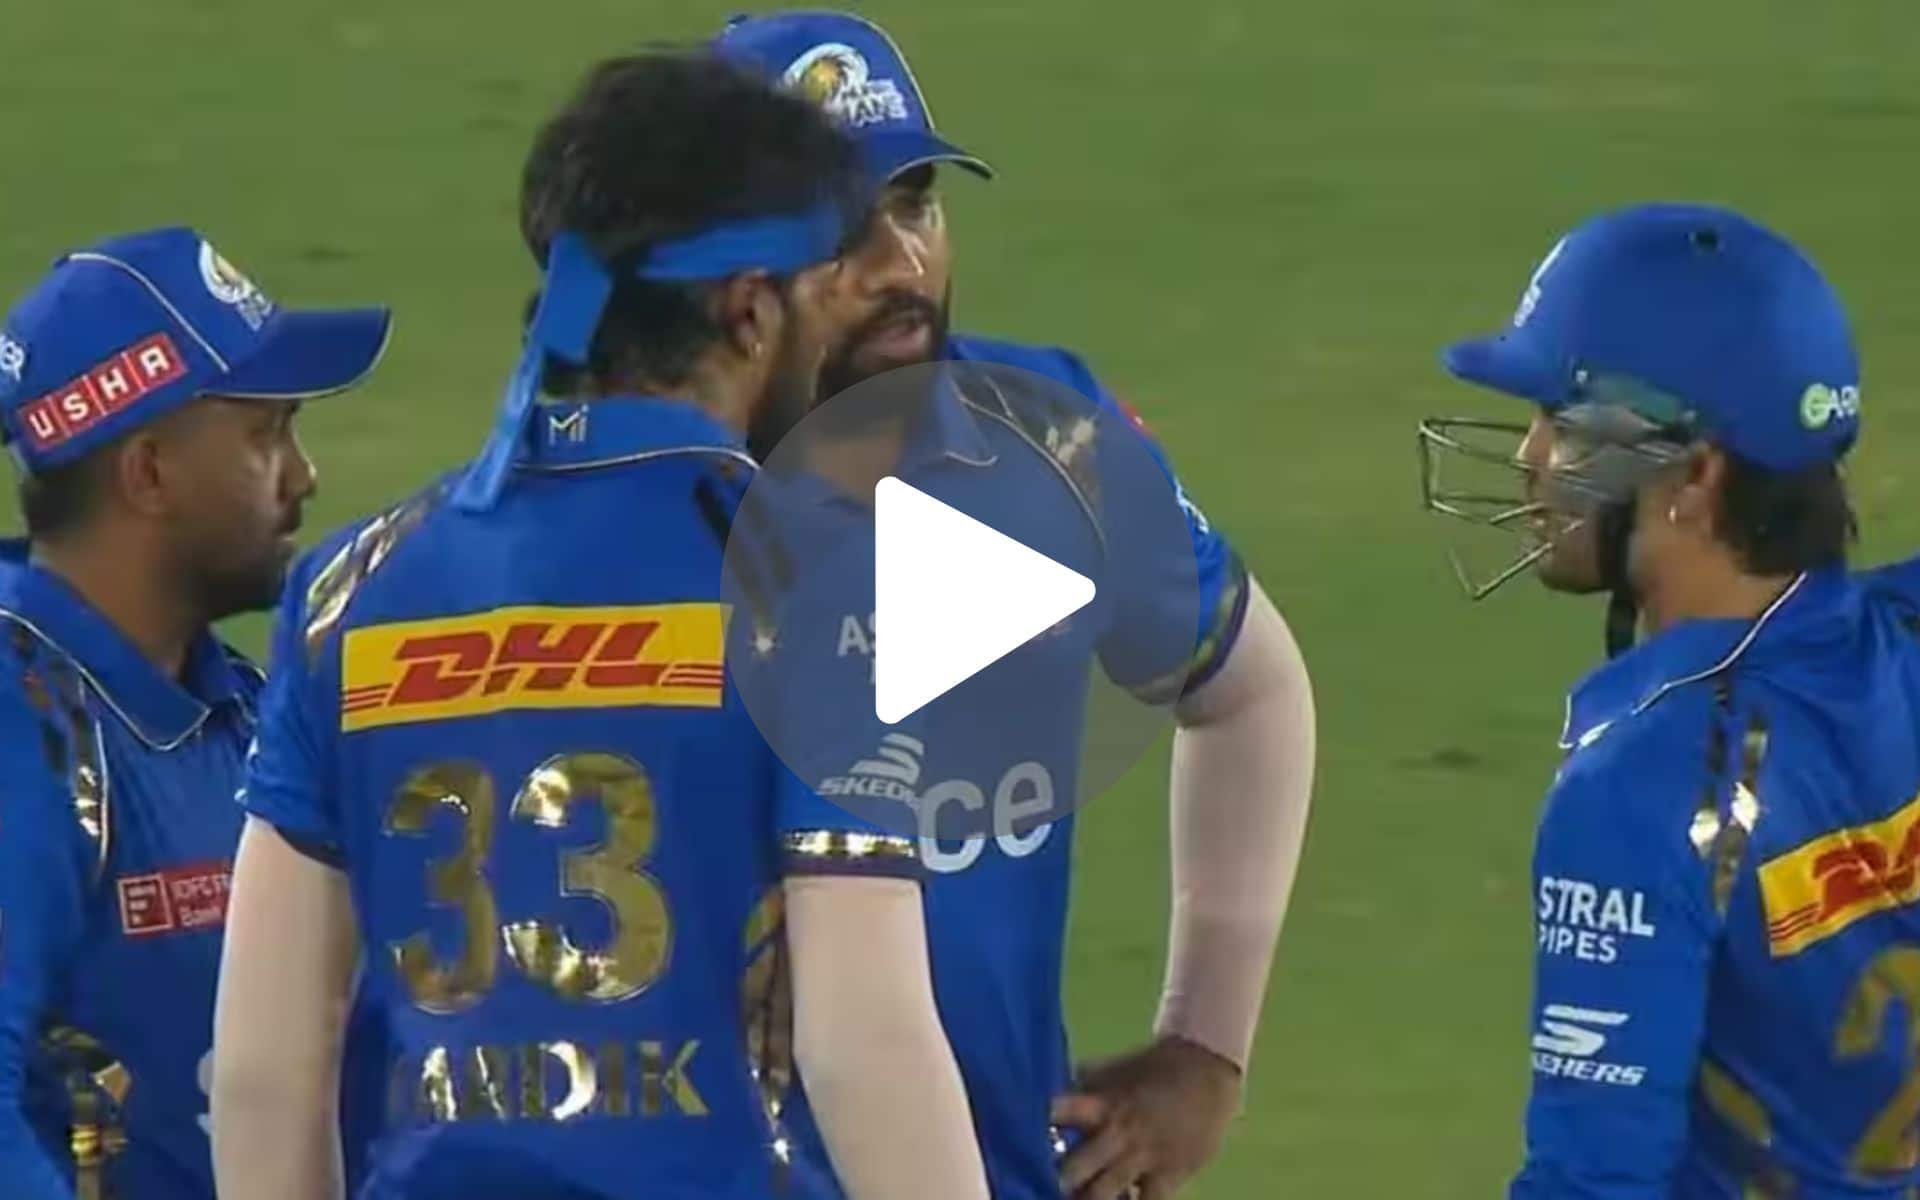 [Watch] Rohit Sharma, Bumrah Visibly Frustrated With Pandya's Captaincy In GT vs MI